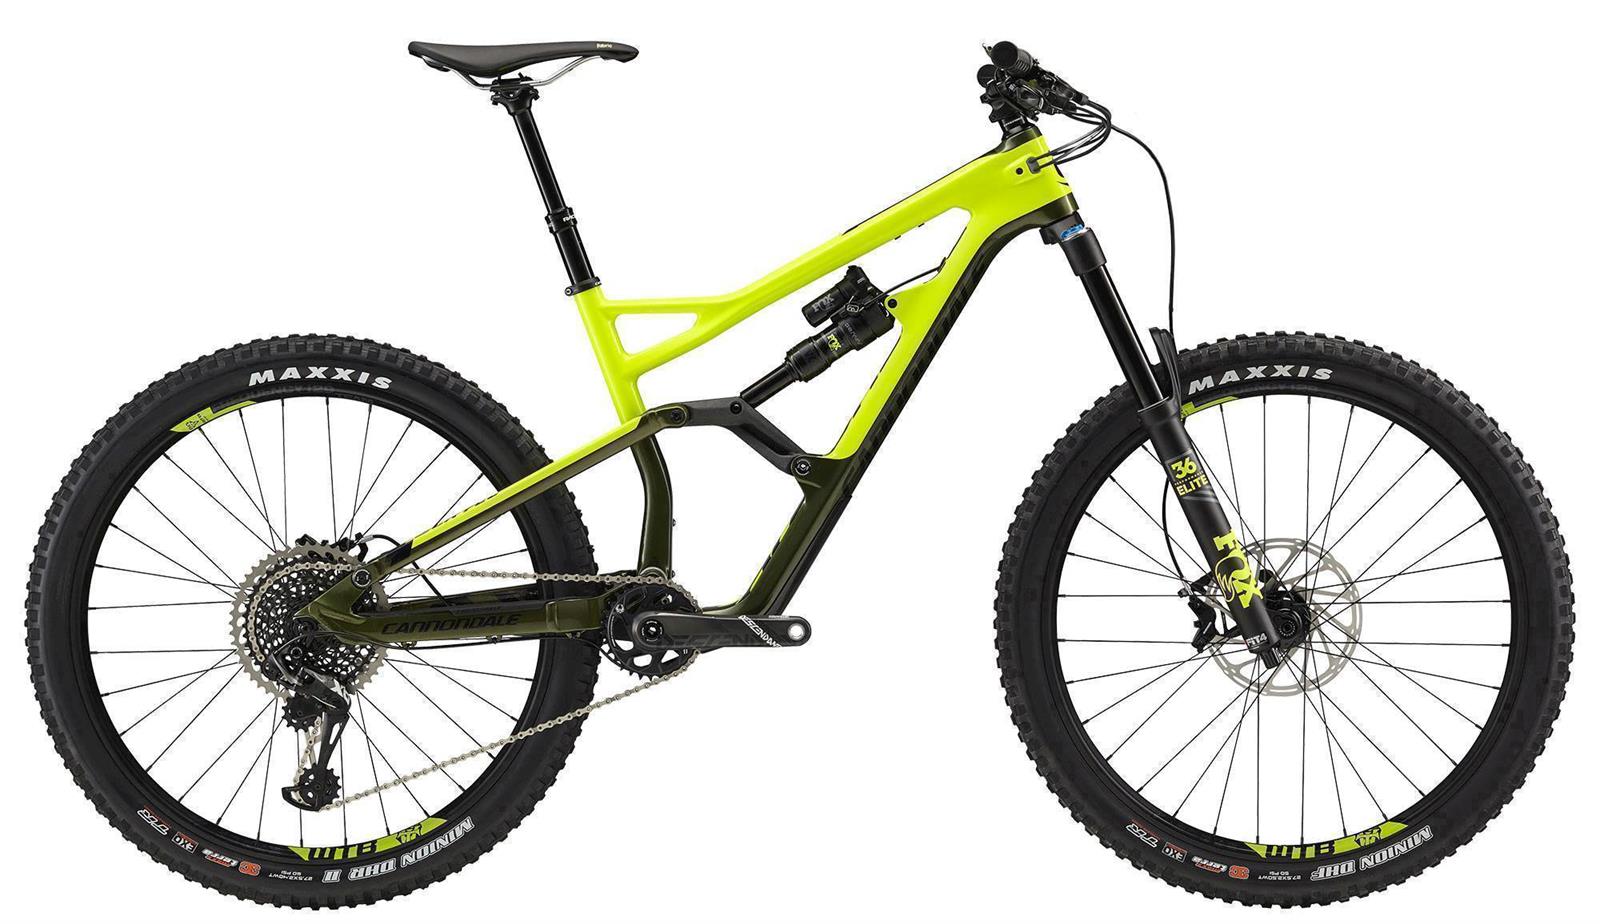 CANNONDALE Jekyll Carbon/alloy 2 (2018)